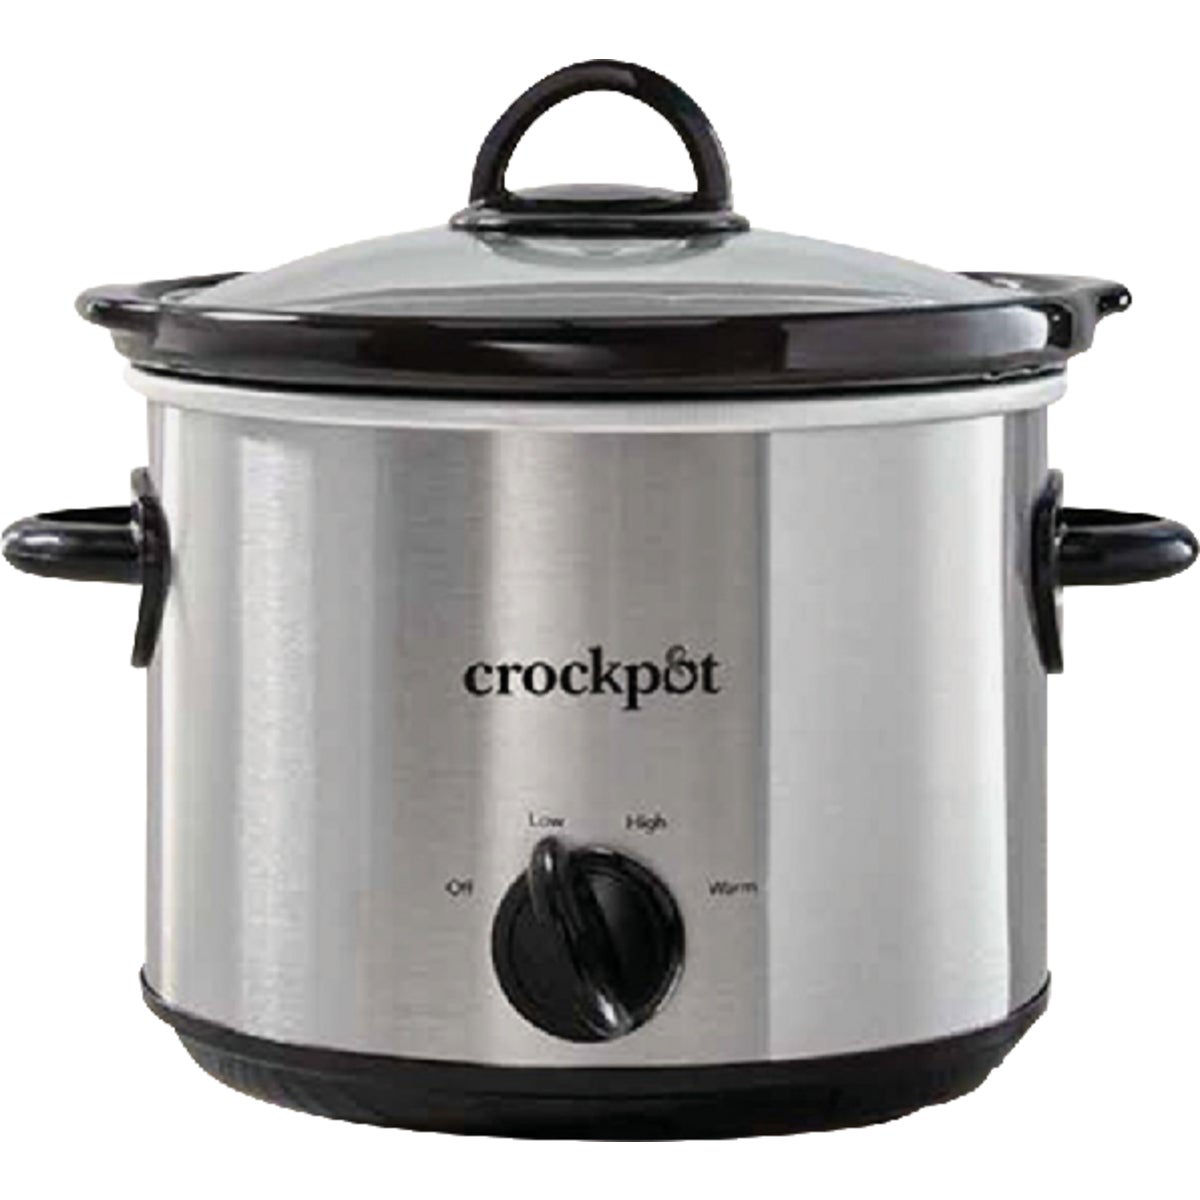 Crockpot 3 Qt. Stainless Steel Slow Cooker